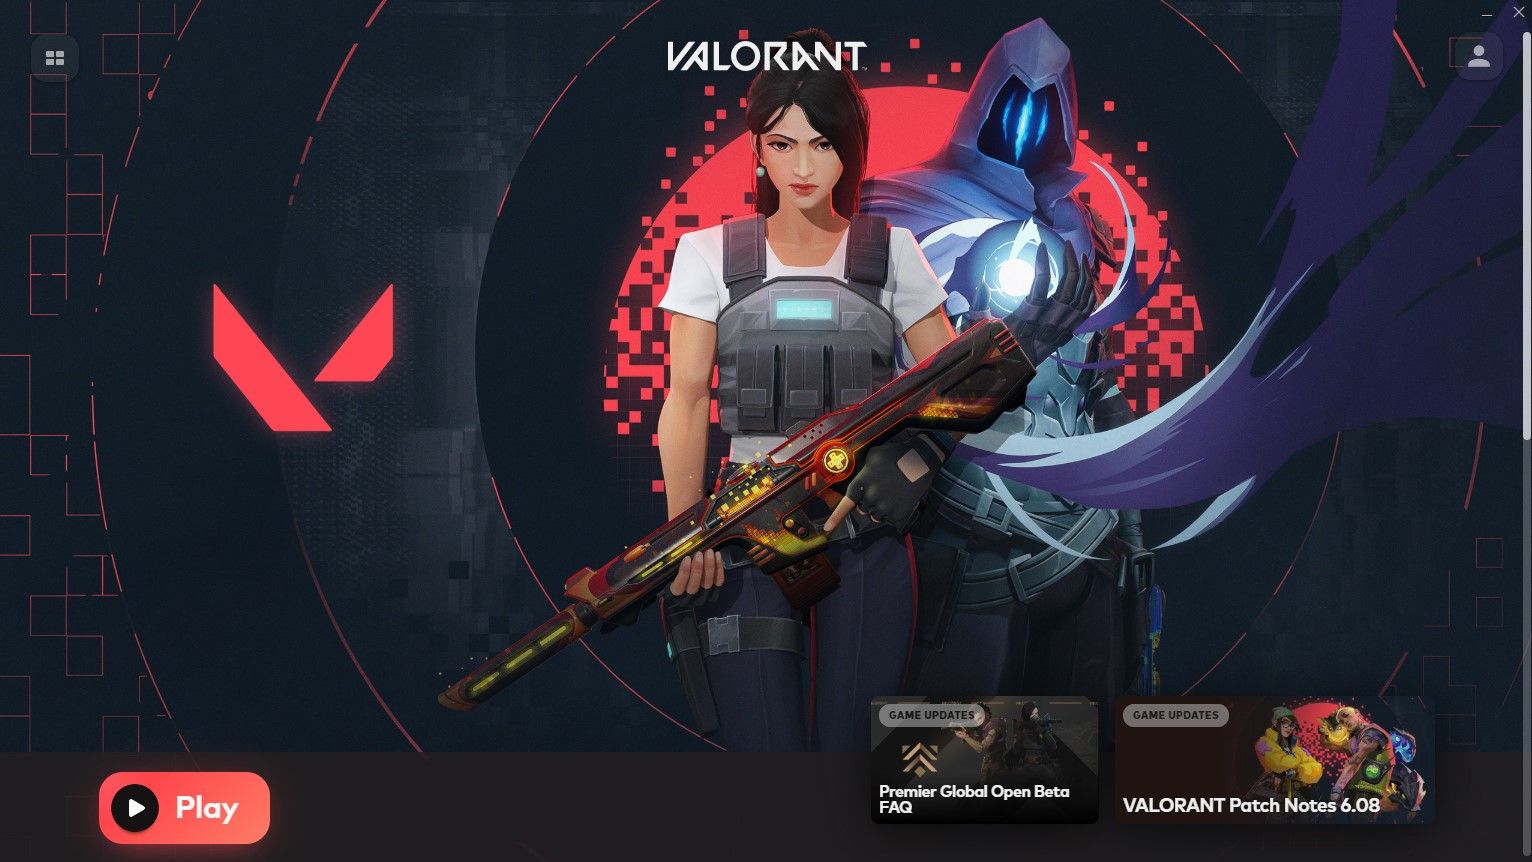 Screenshot Showing the Valorant Game Launcher